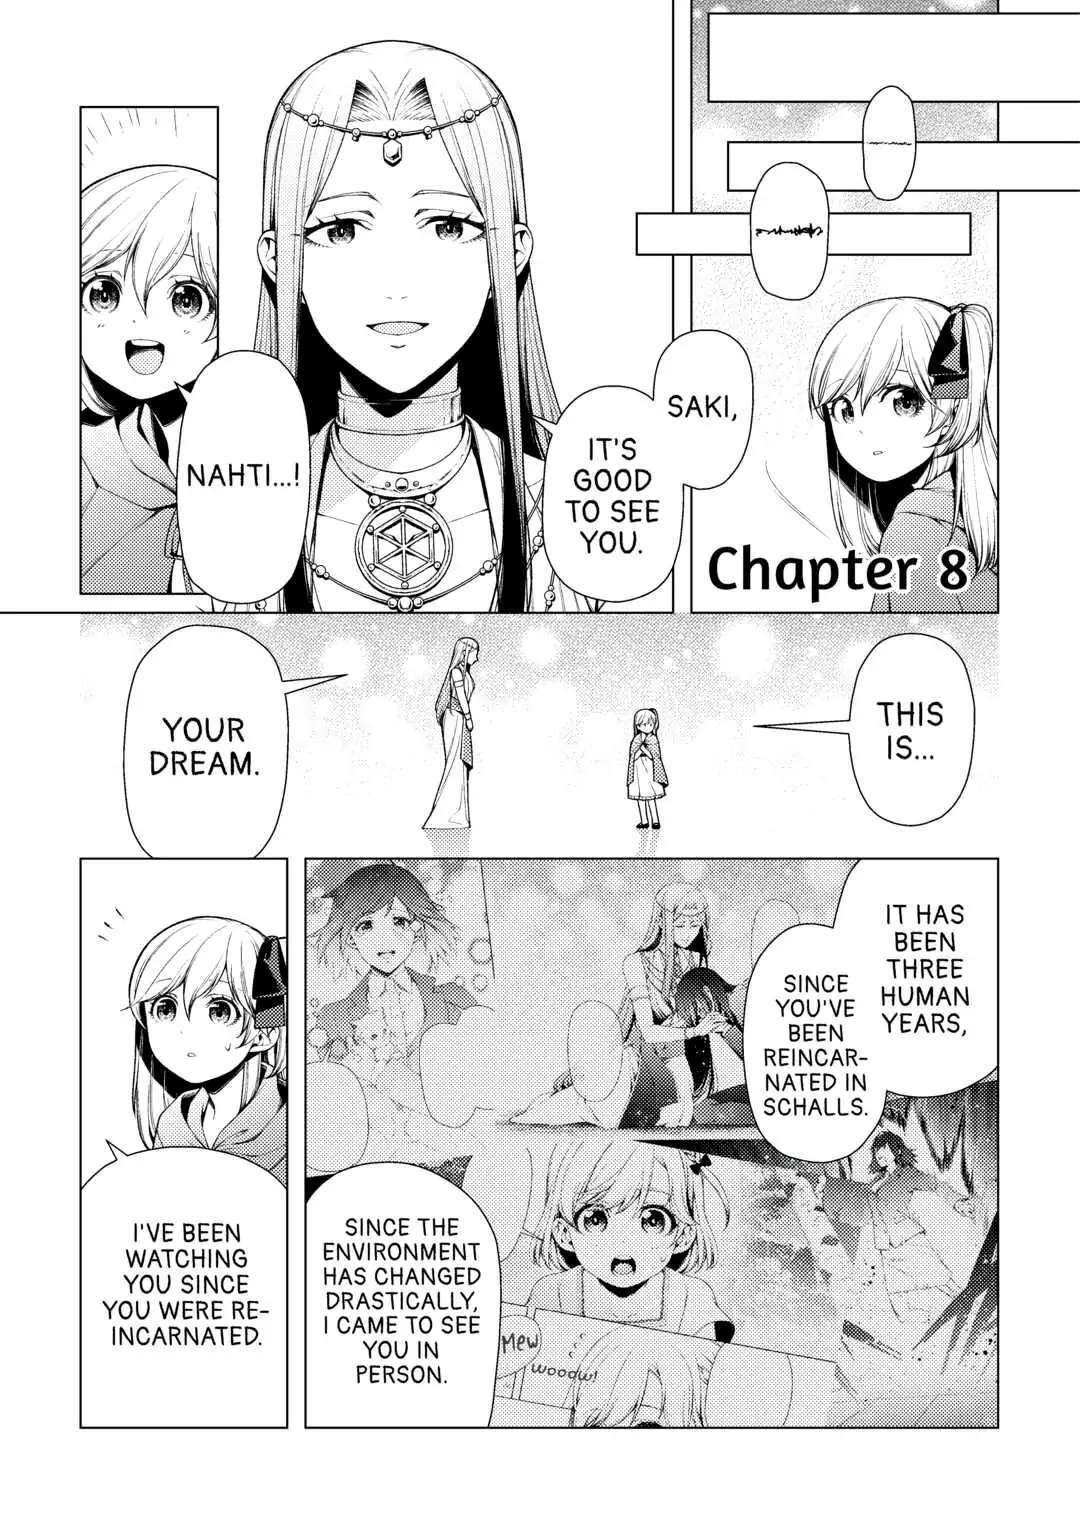 I had a hard time in my previous life, so God came to make it up to me - chapter 8 - #2